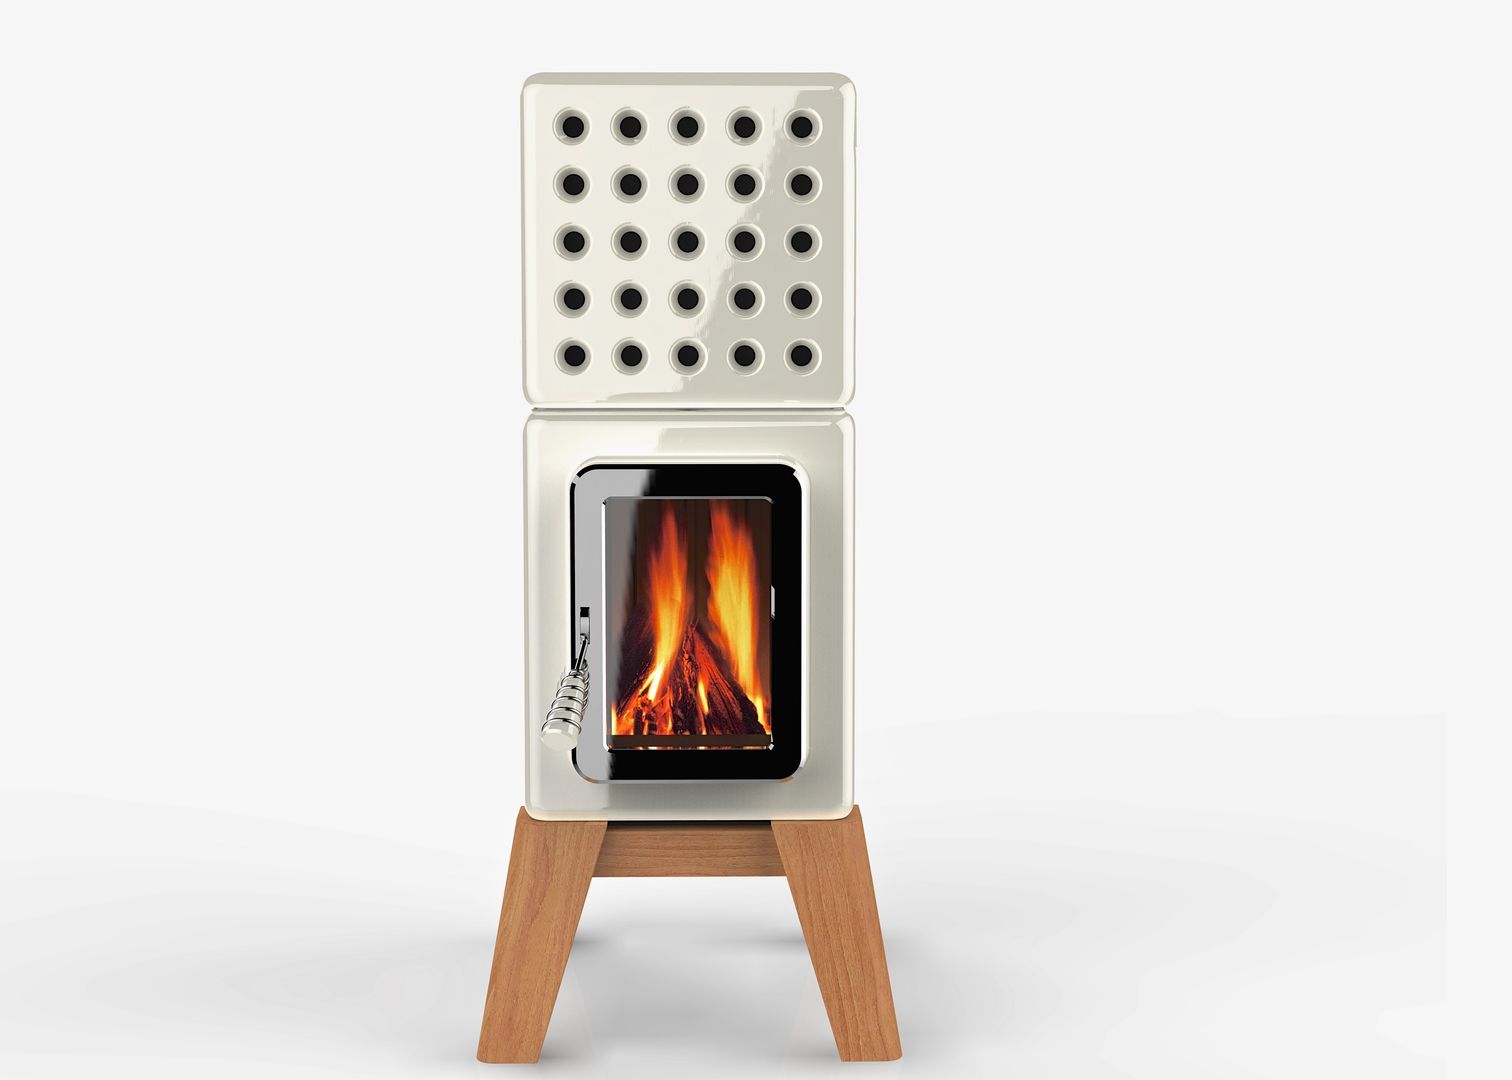 CUBI-STACK-BY-ADRIANO-DESIGN Adriano Design Modern living room Fireplaces & accessories